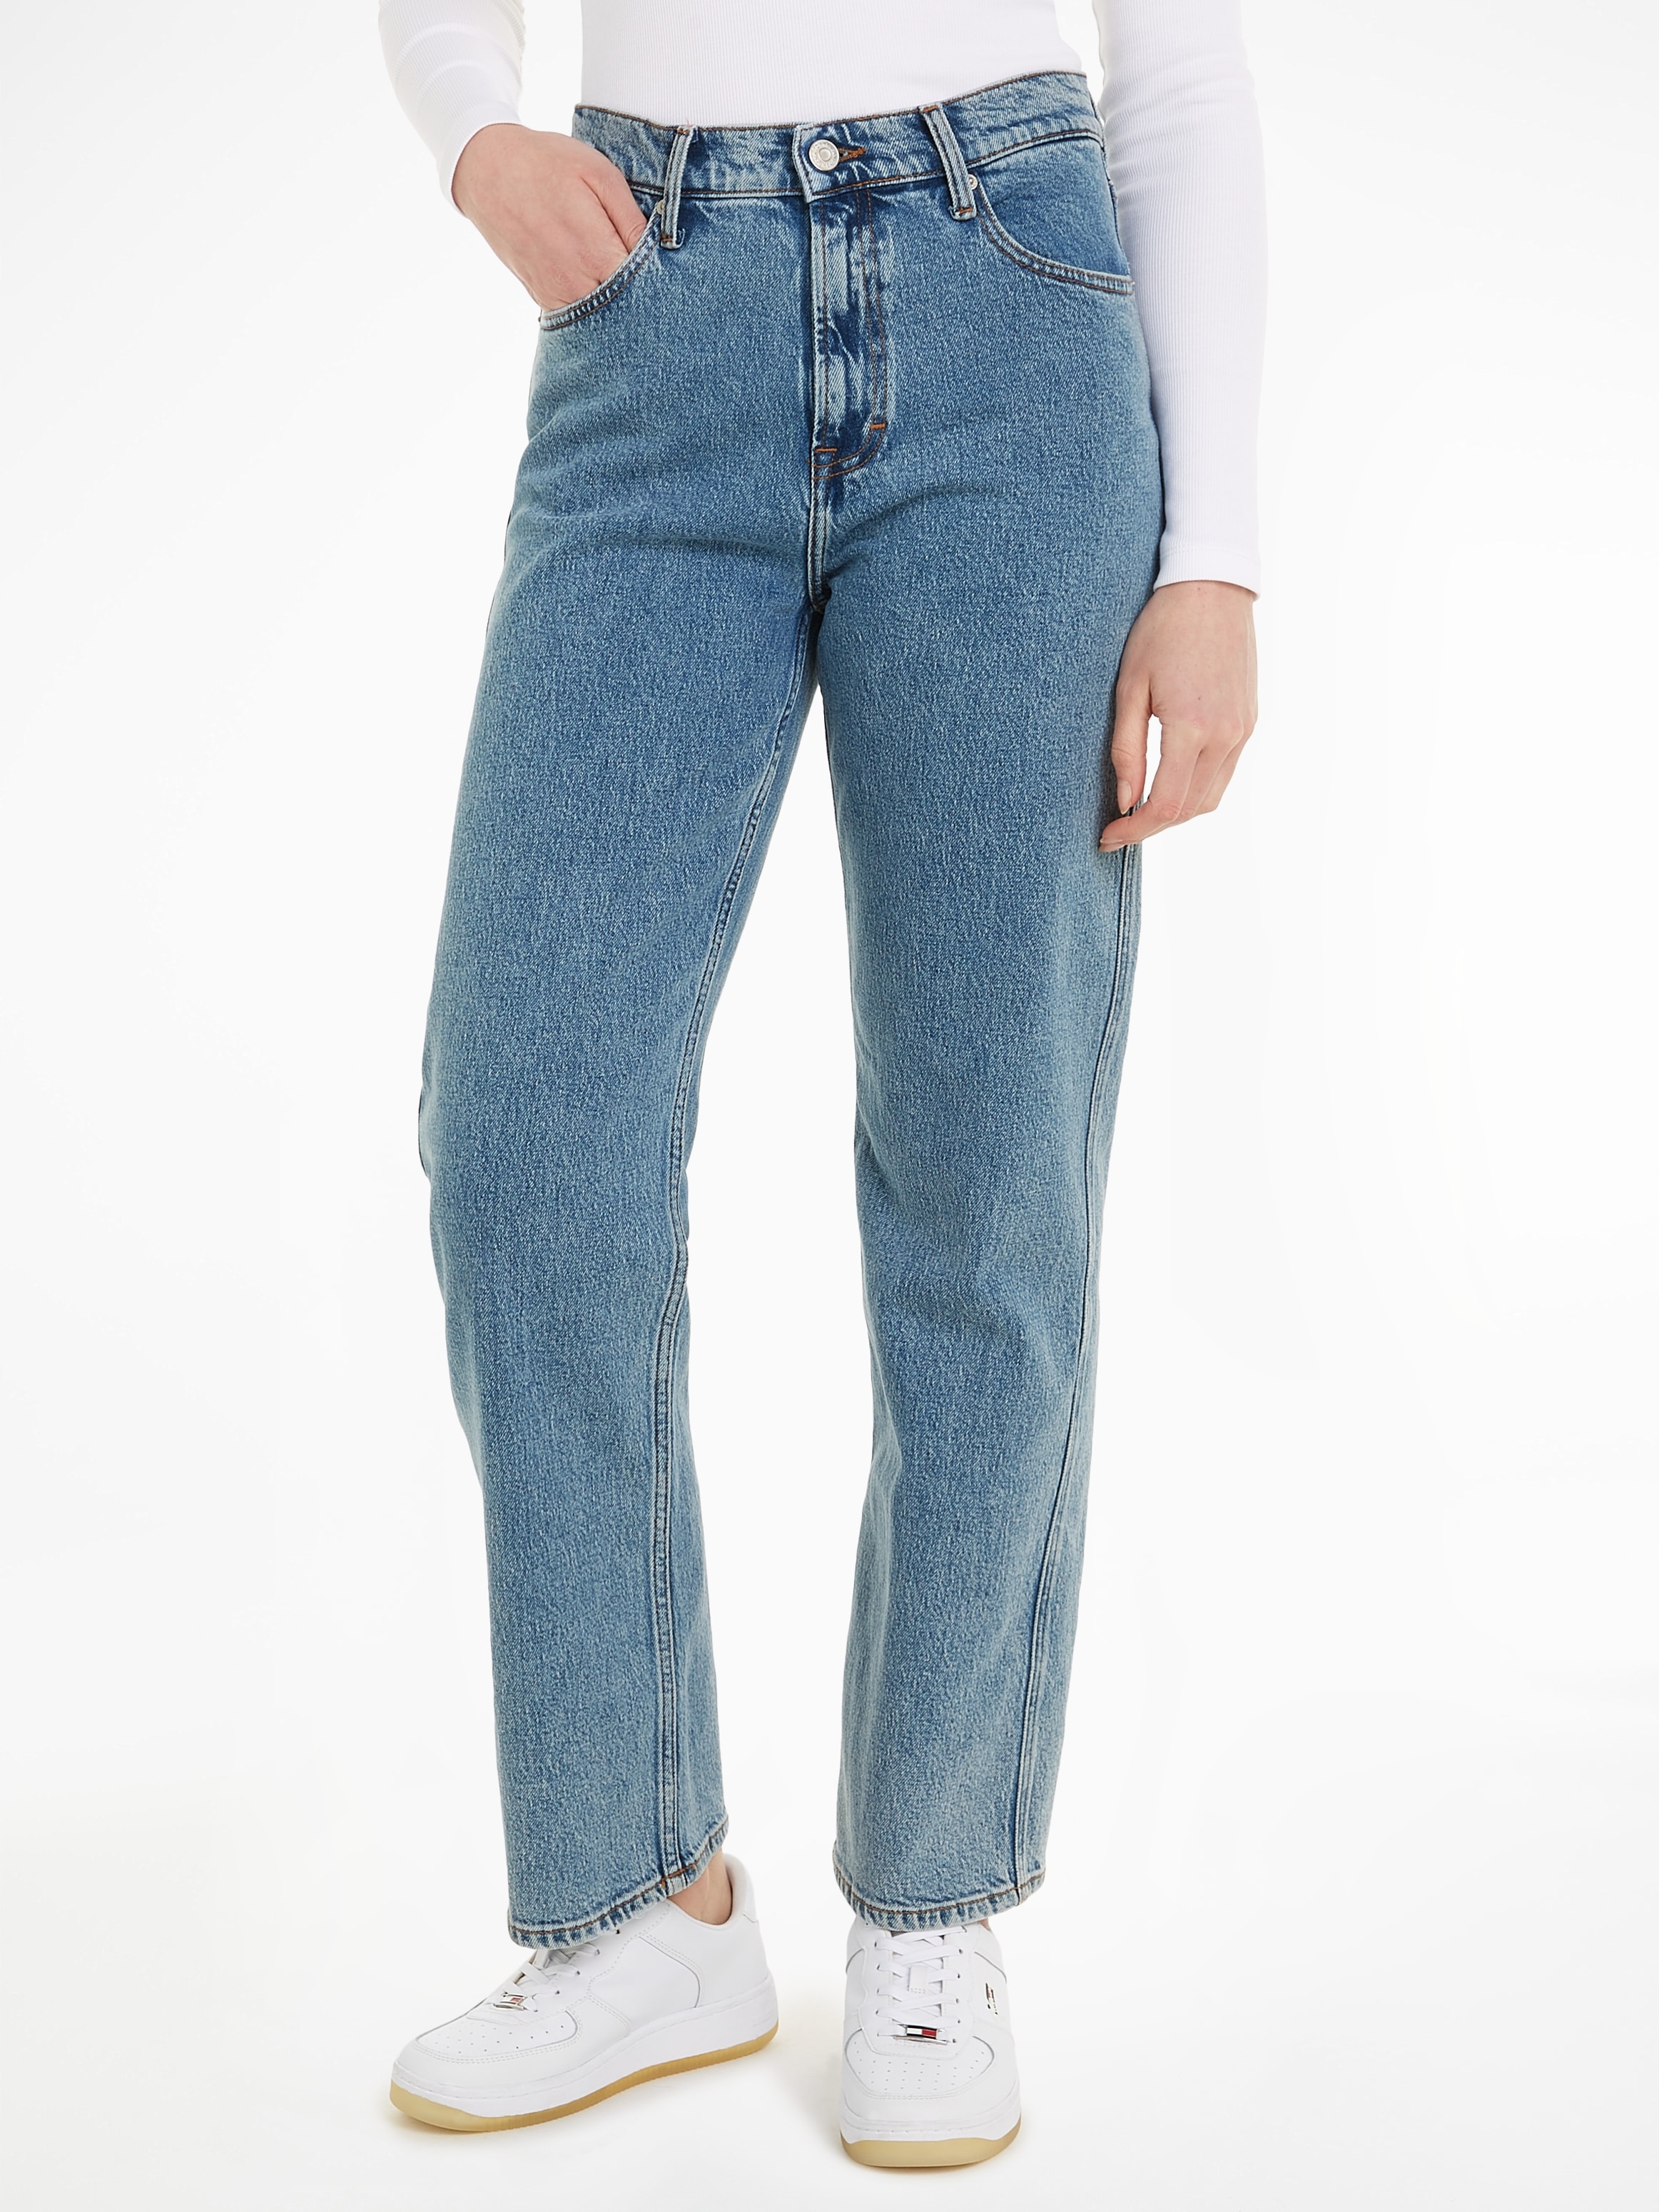 Pocket Jeans LS »BETSY Five bei Style im OTTOversand Tommy Weite Jeans CG4136«, MD